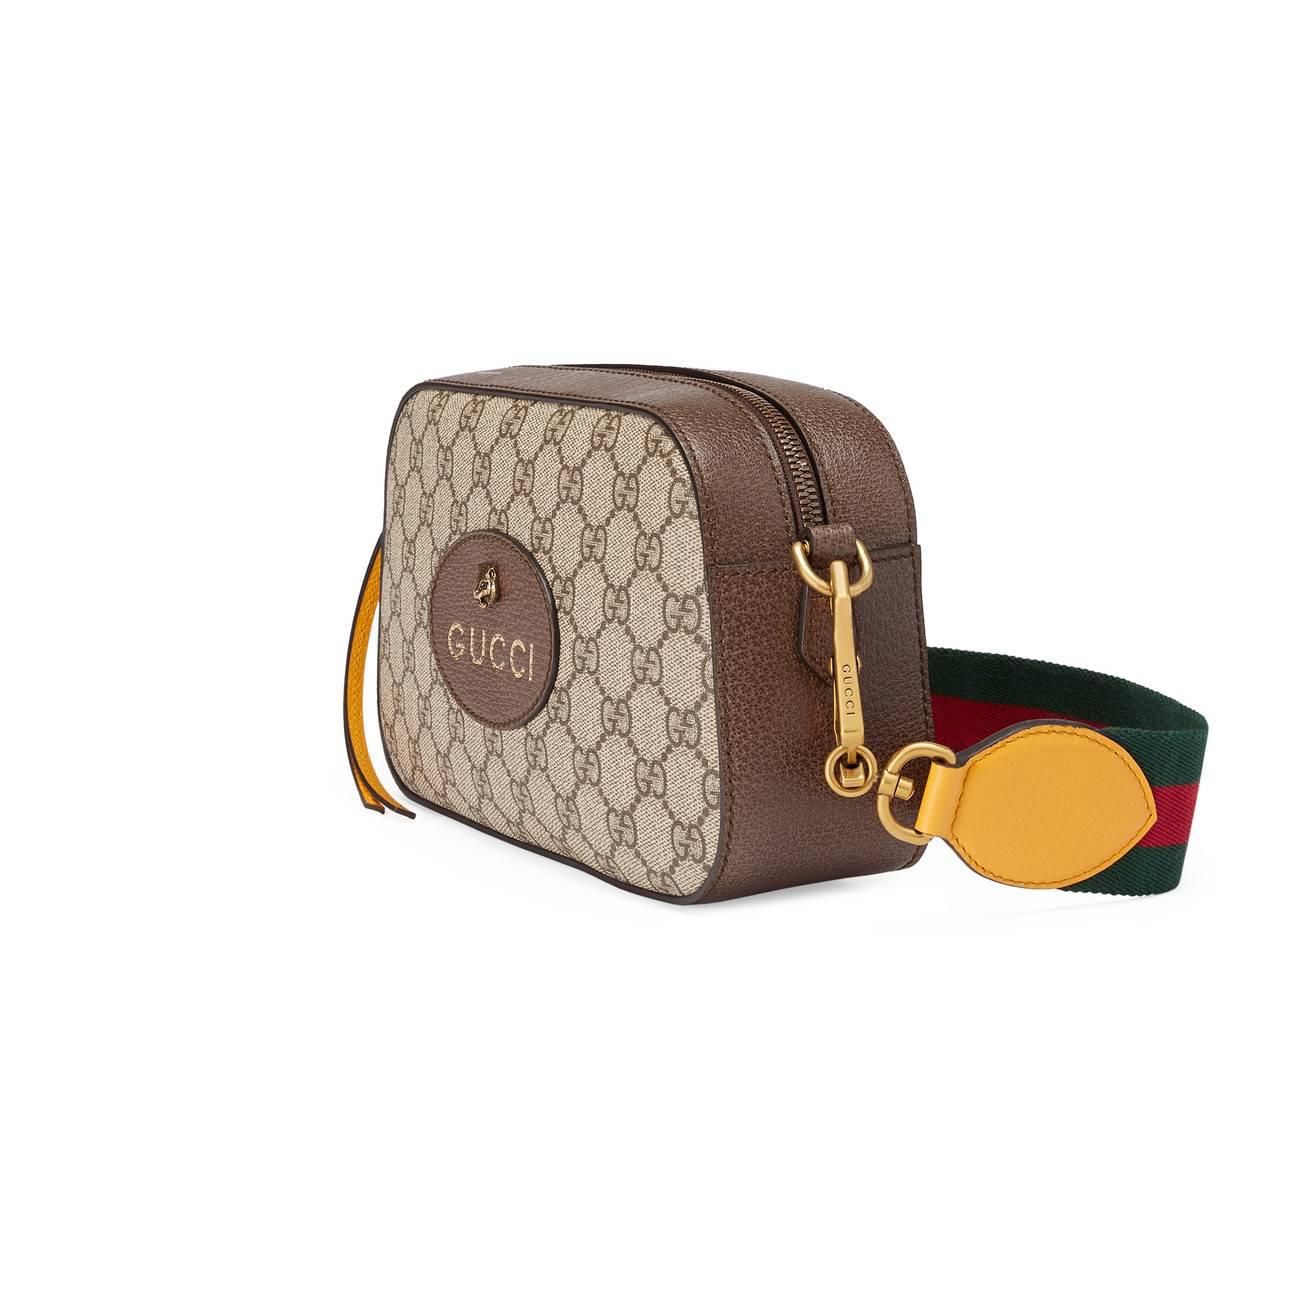 Gucci Leather GG Supreme Messenger Bag in Brown - Lyst